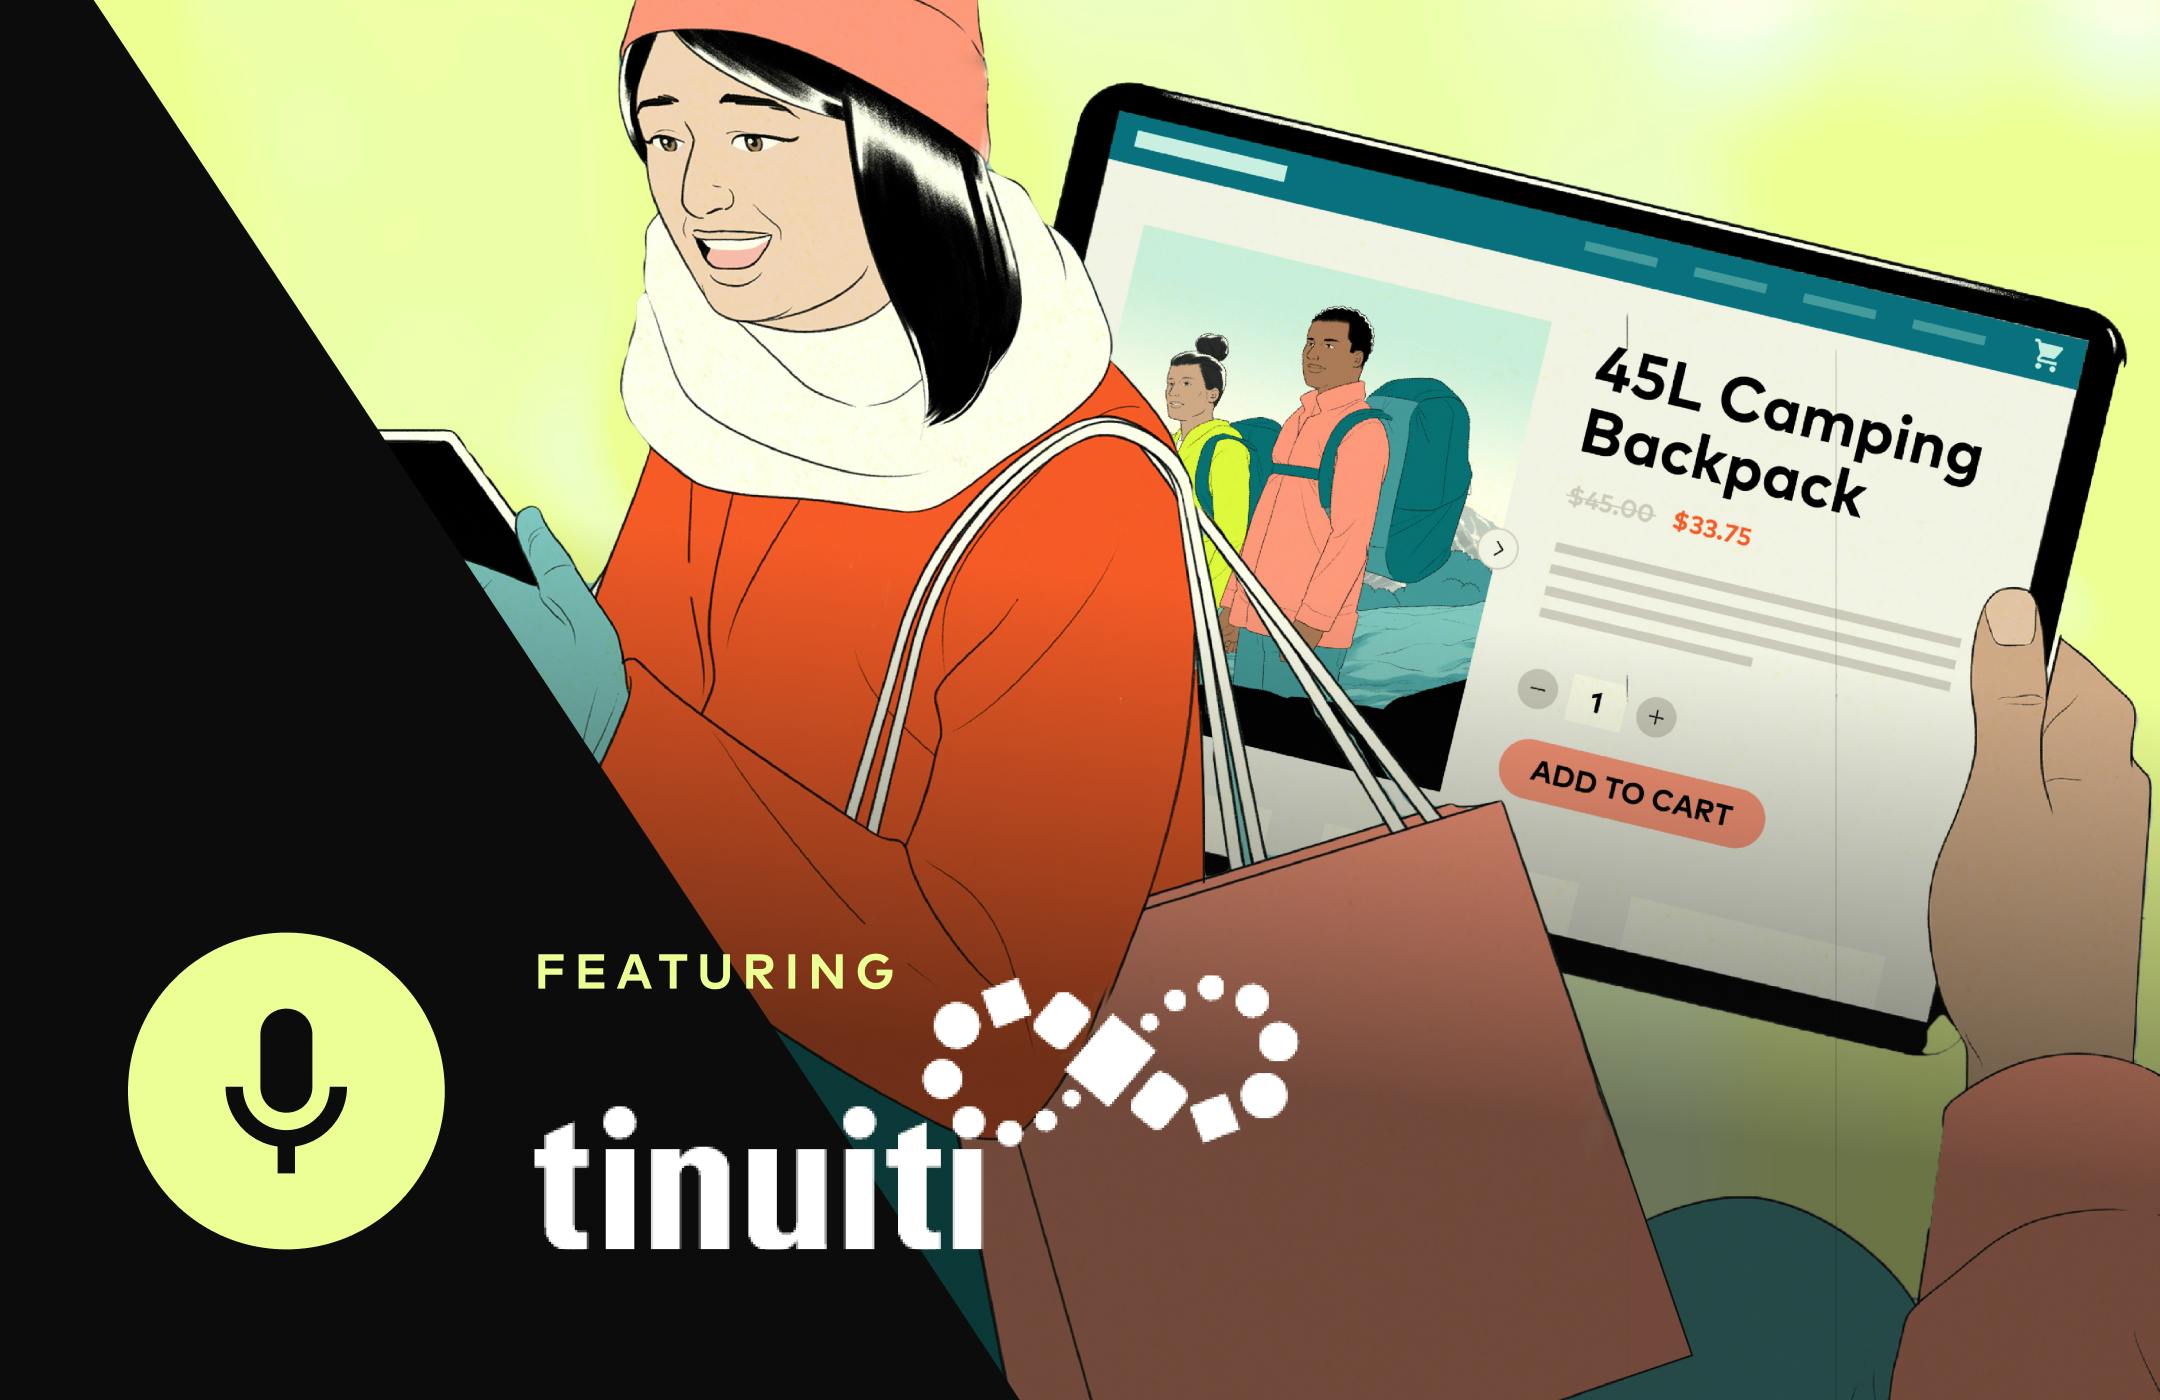 Illustration of woman looking at her tablet screen, showing a 45L camping backpack, overlaid with text " featuring Tinuiti"